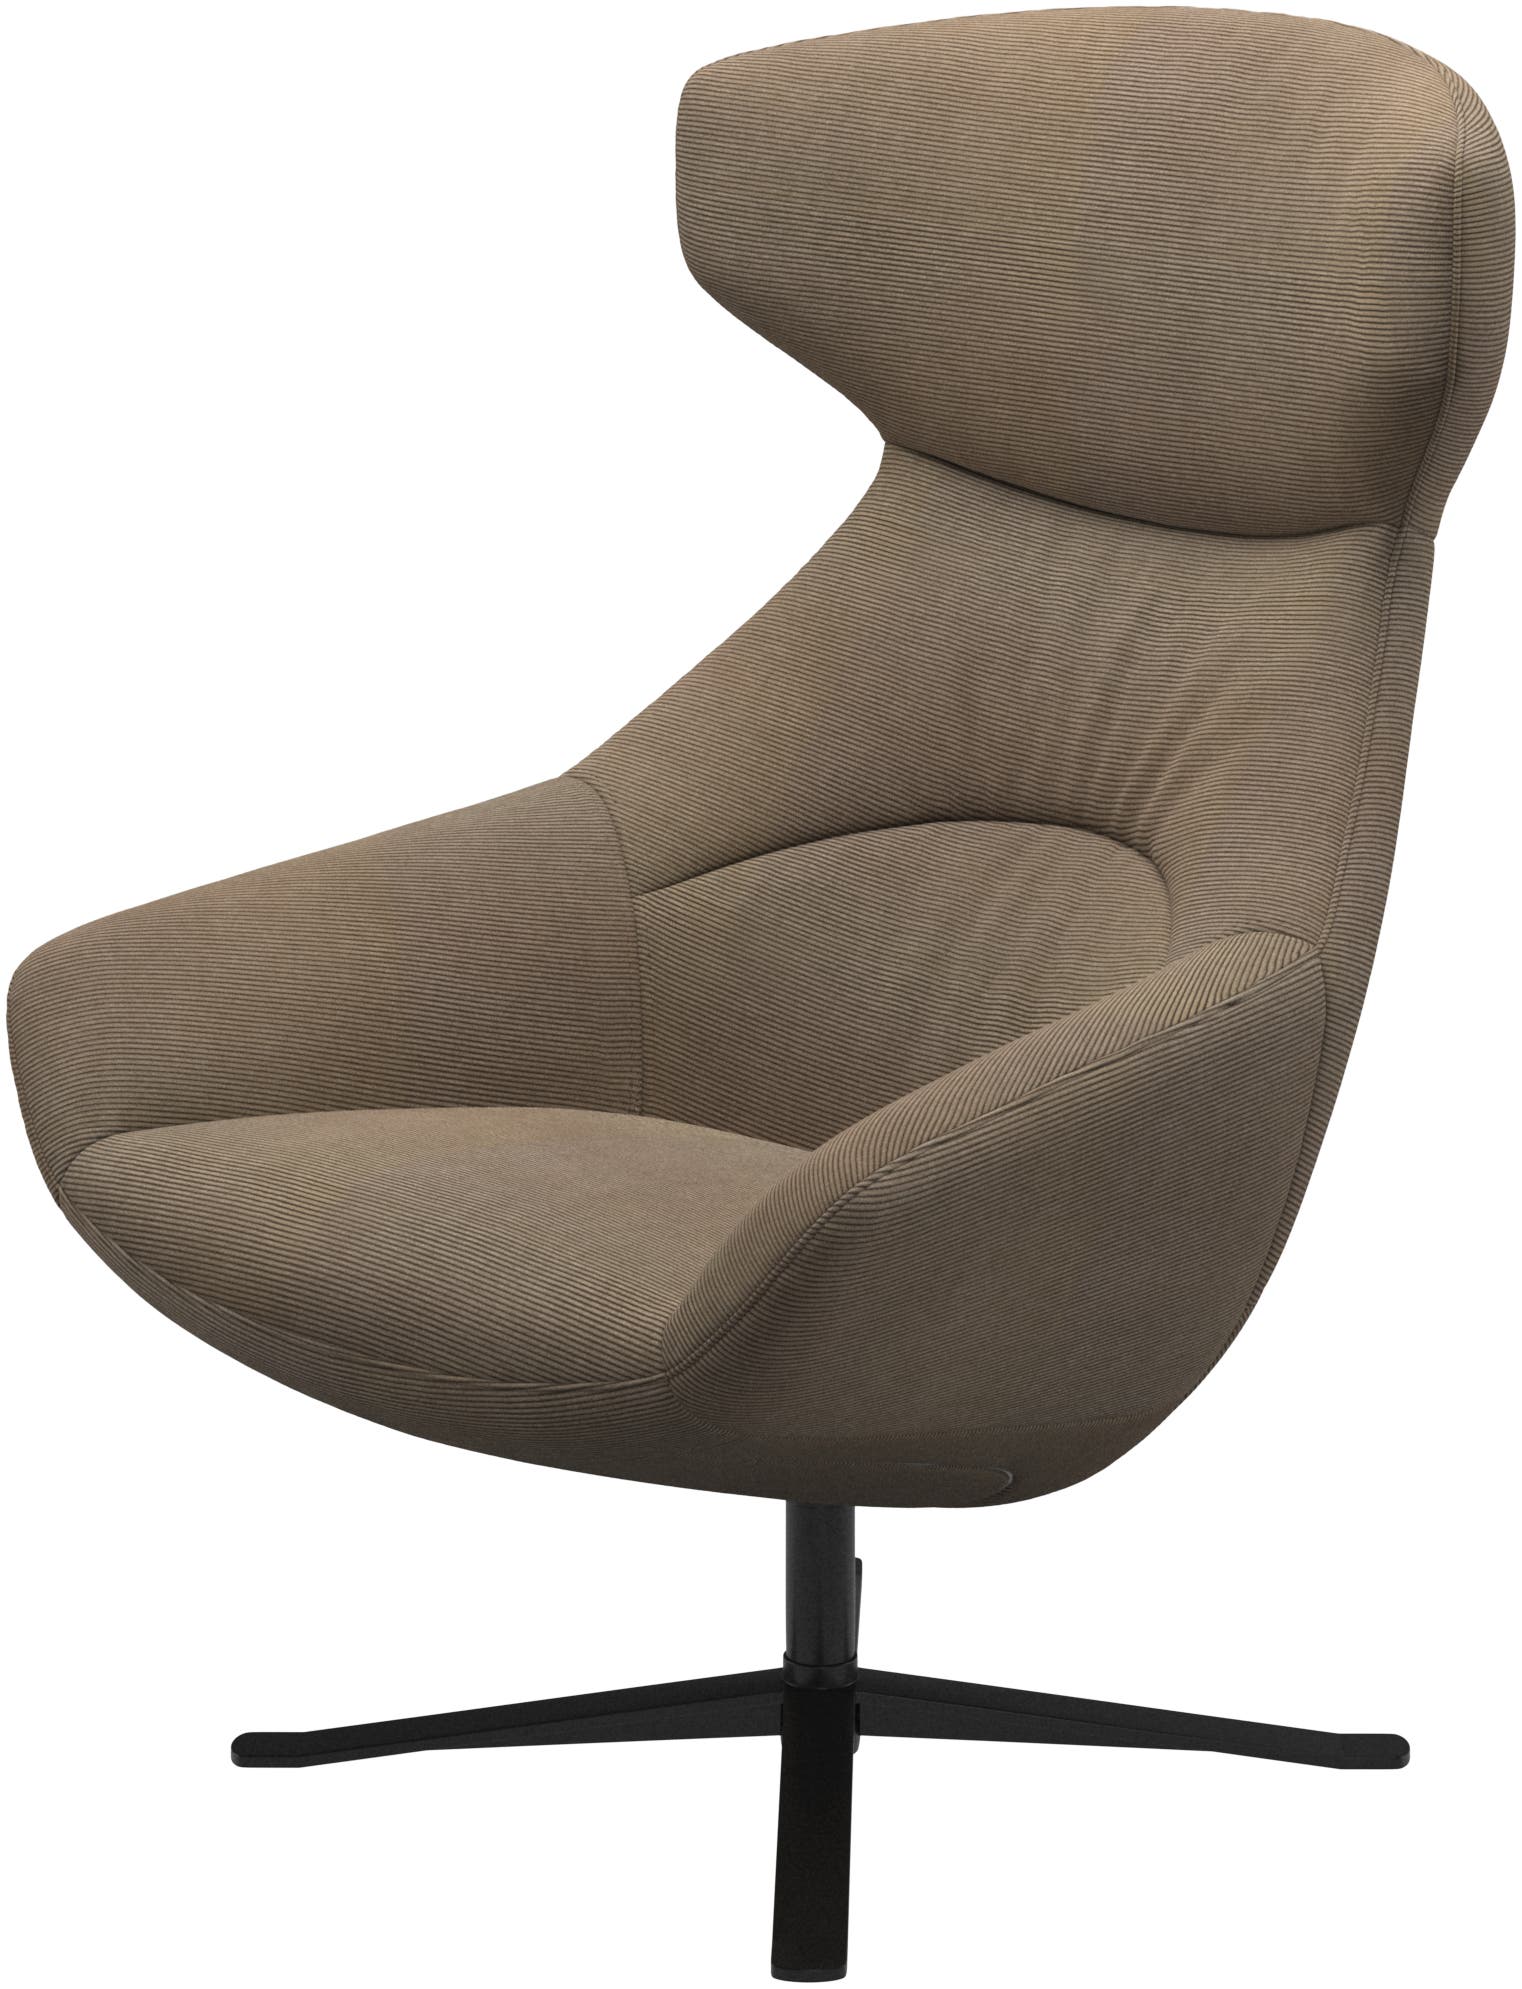 Porto chair with swivel function with footstool 